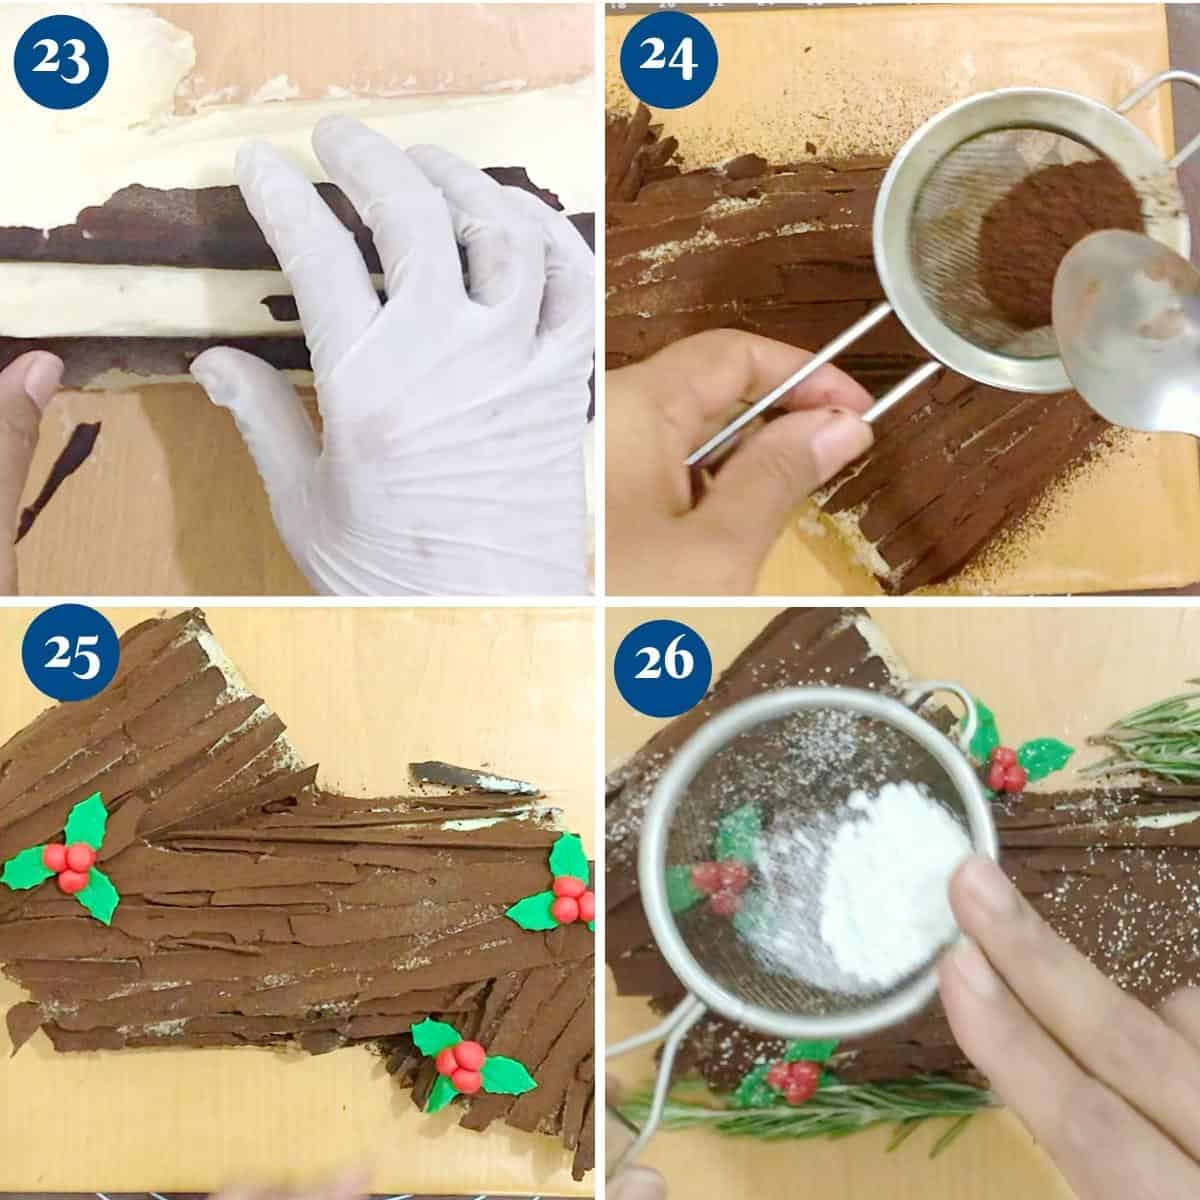 Progress pictures decorating the log cake.